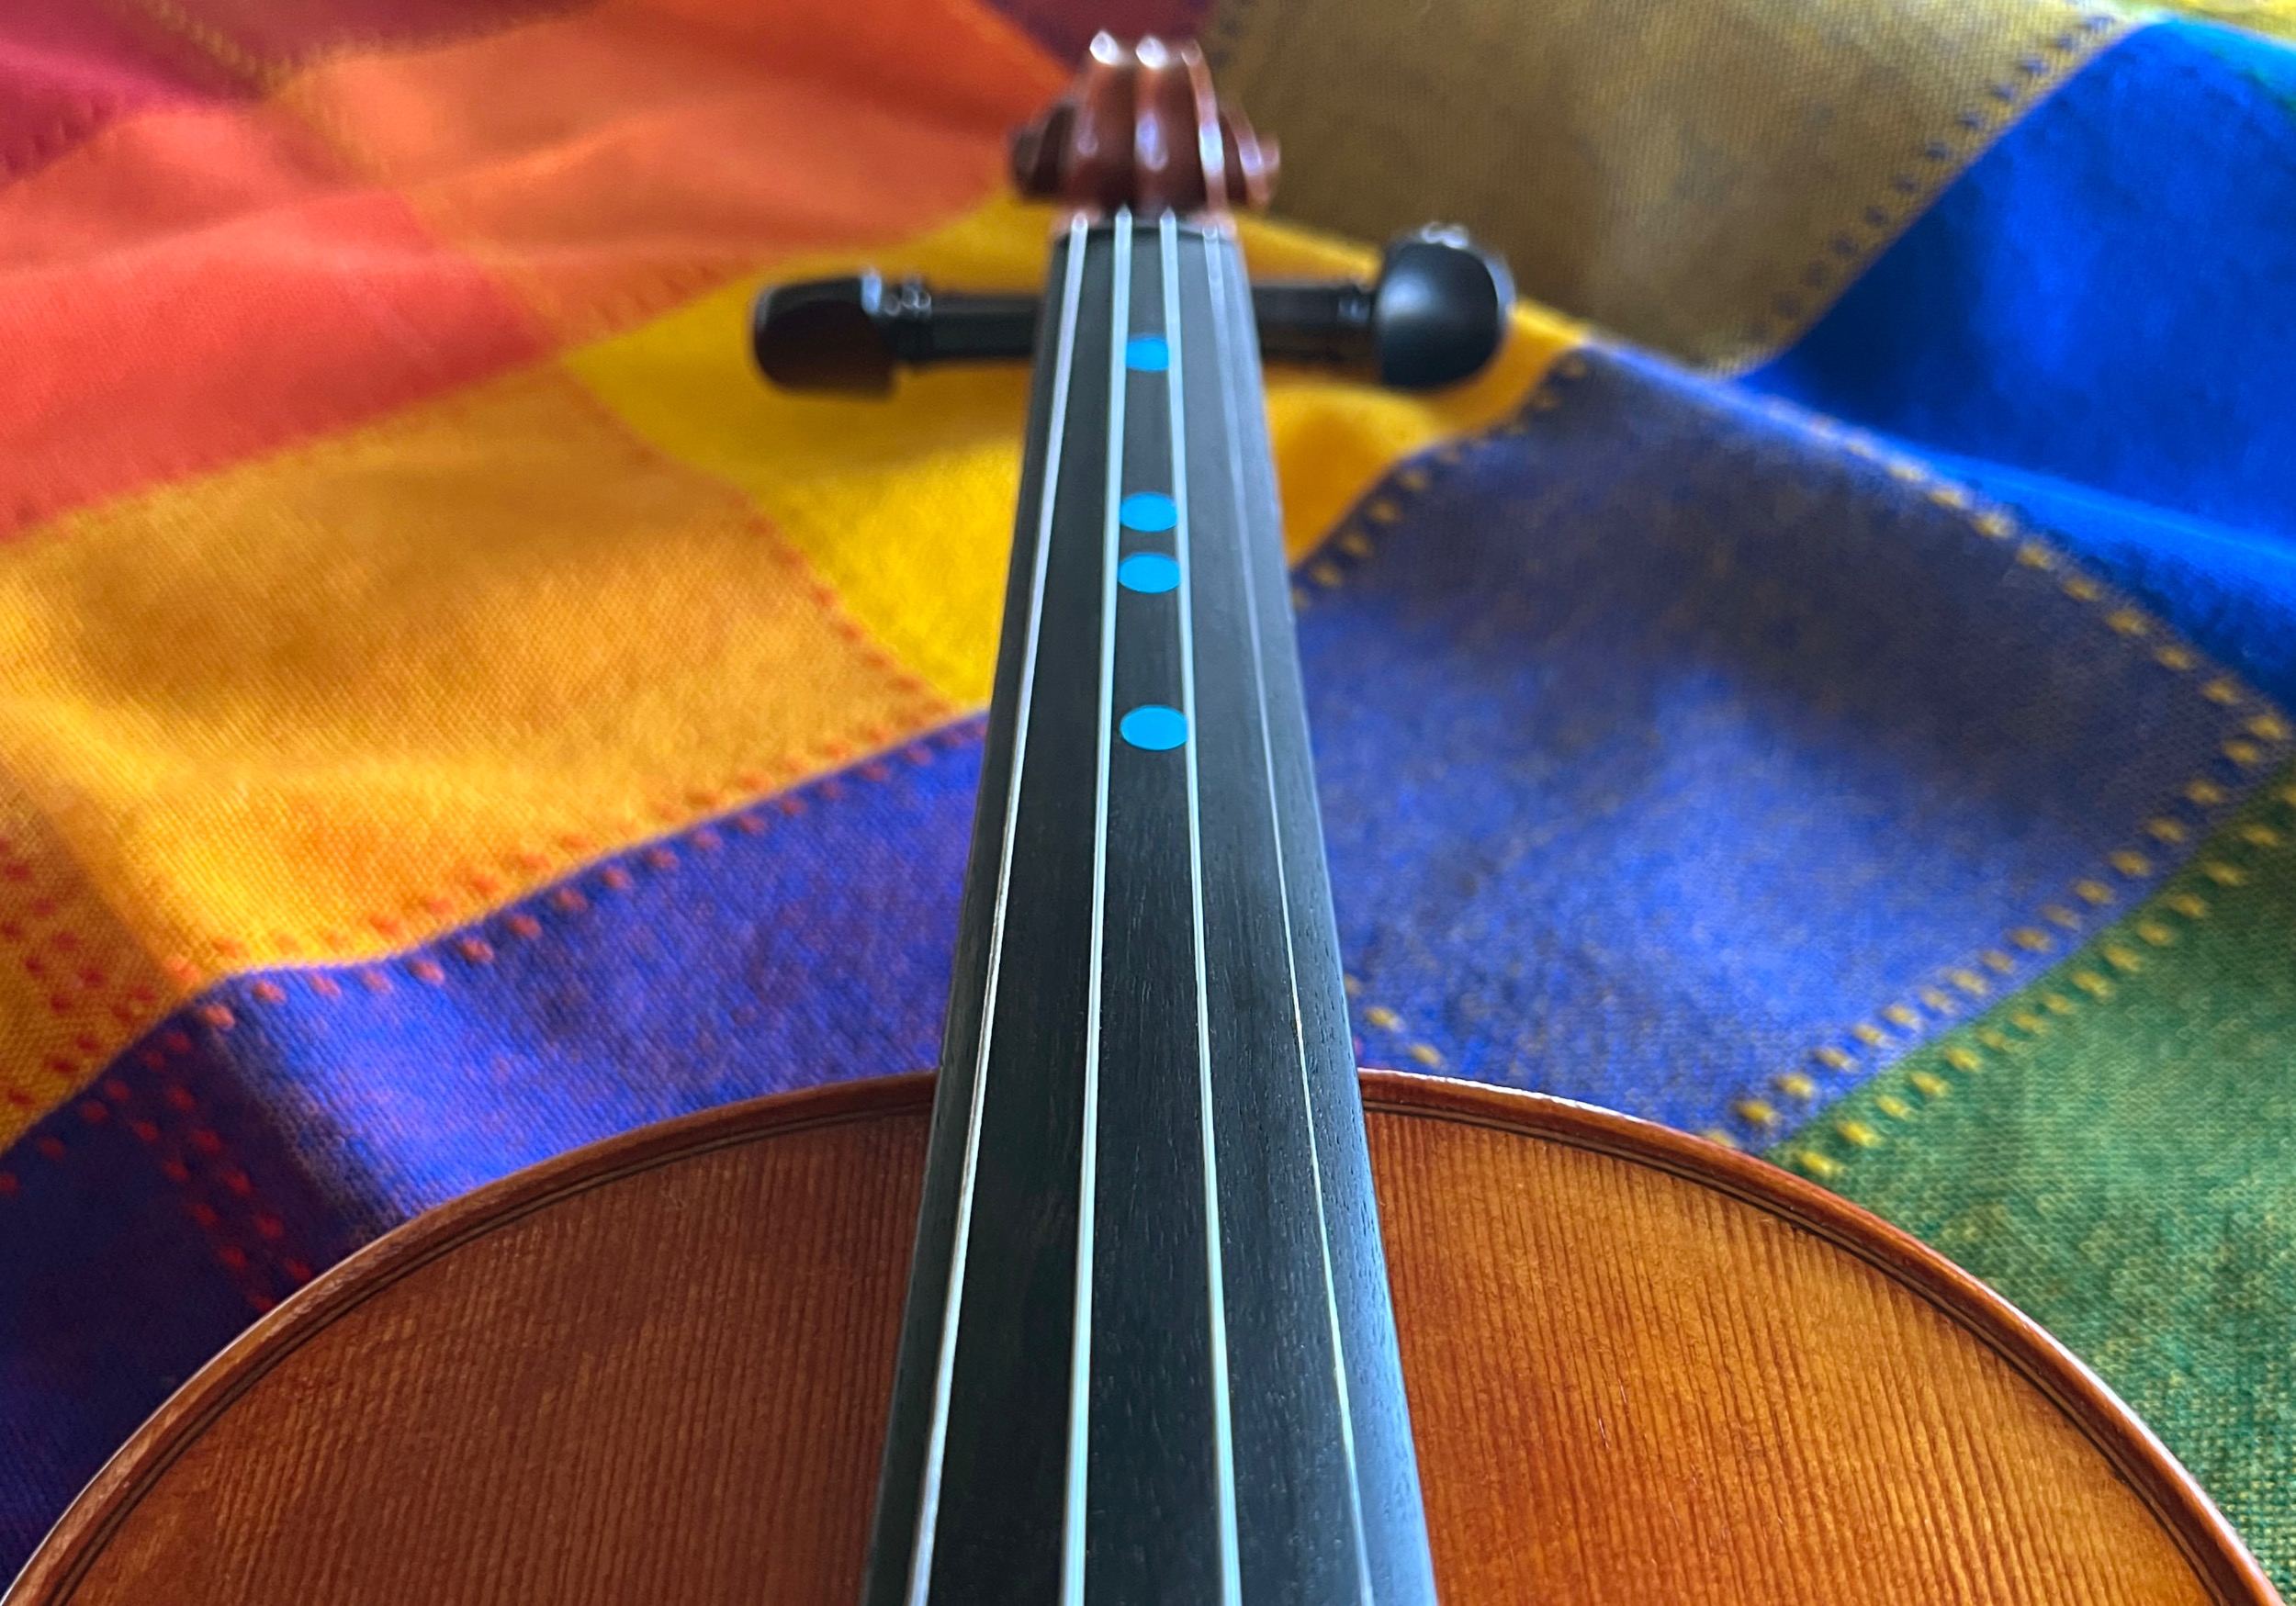 Violin's fingerboard and strings with four small circular blue dot stickers in a row